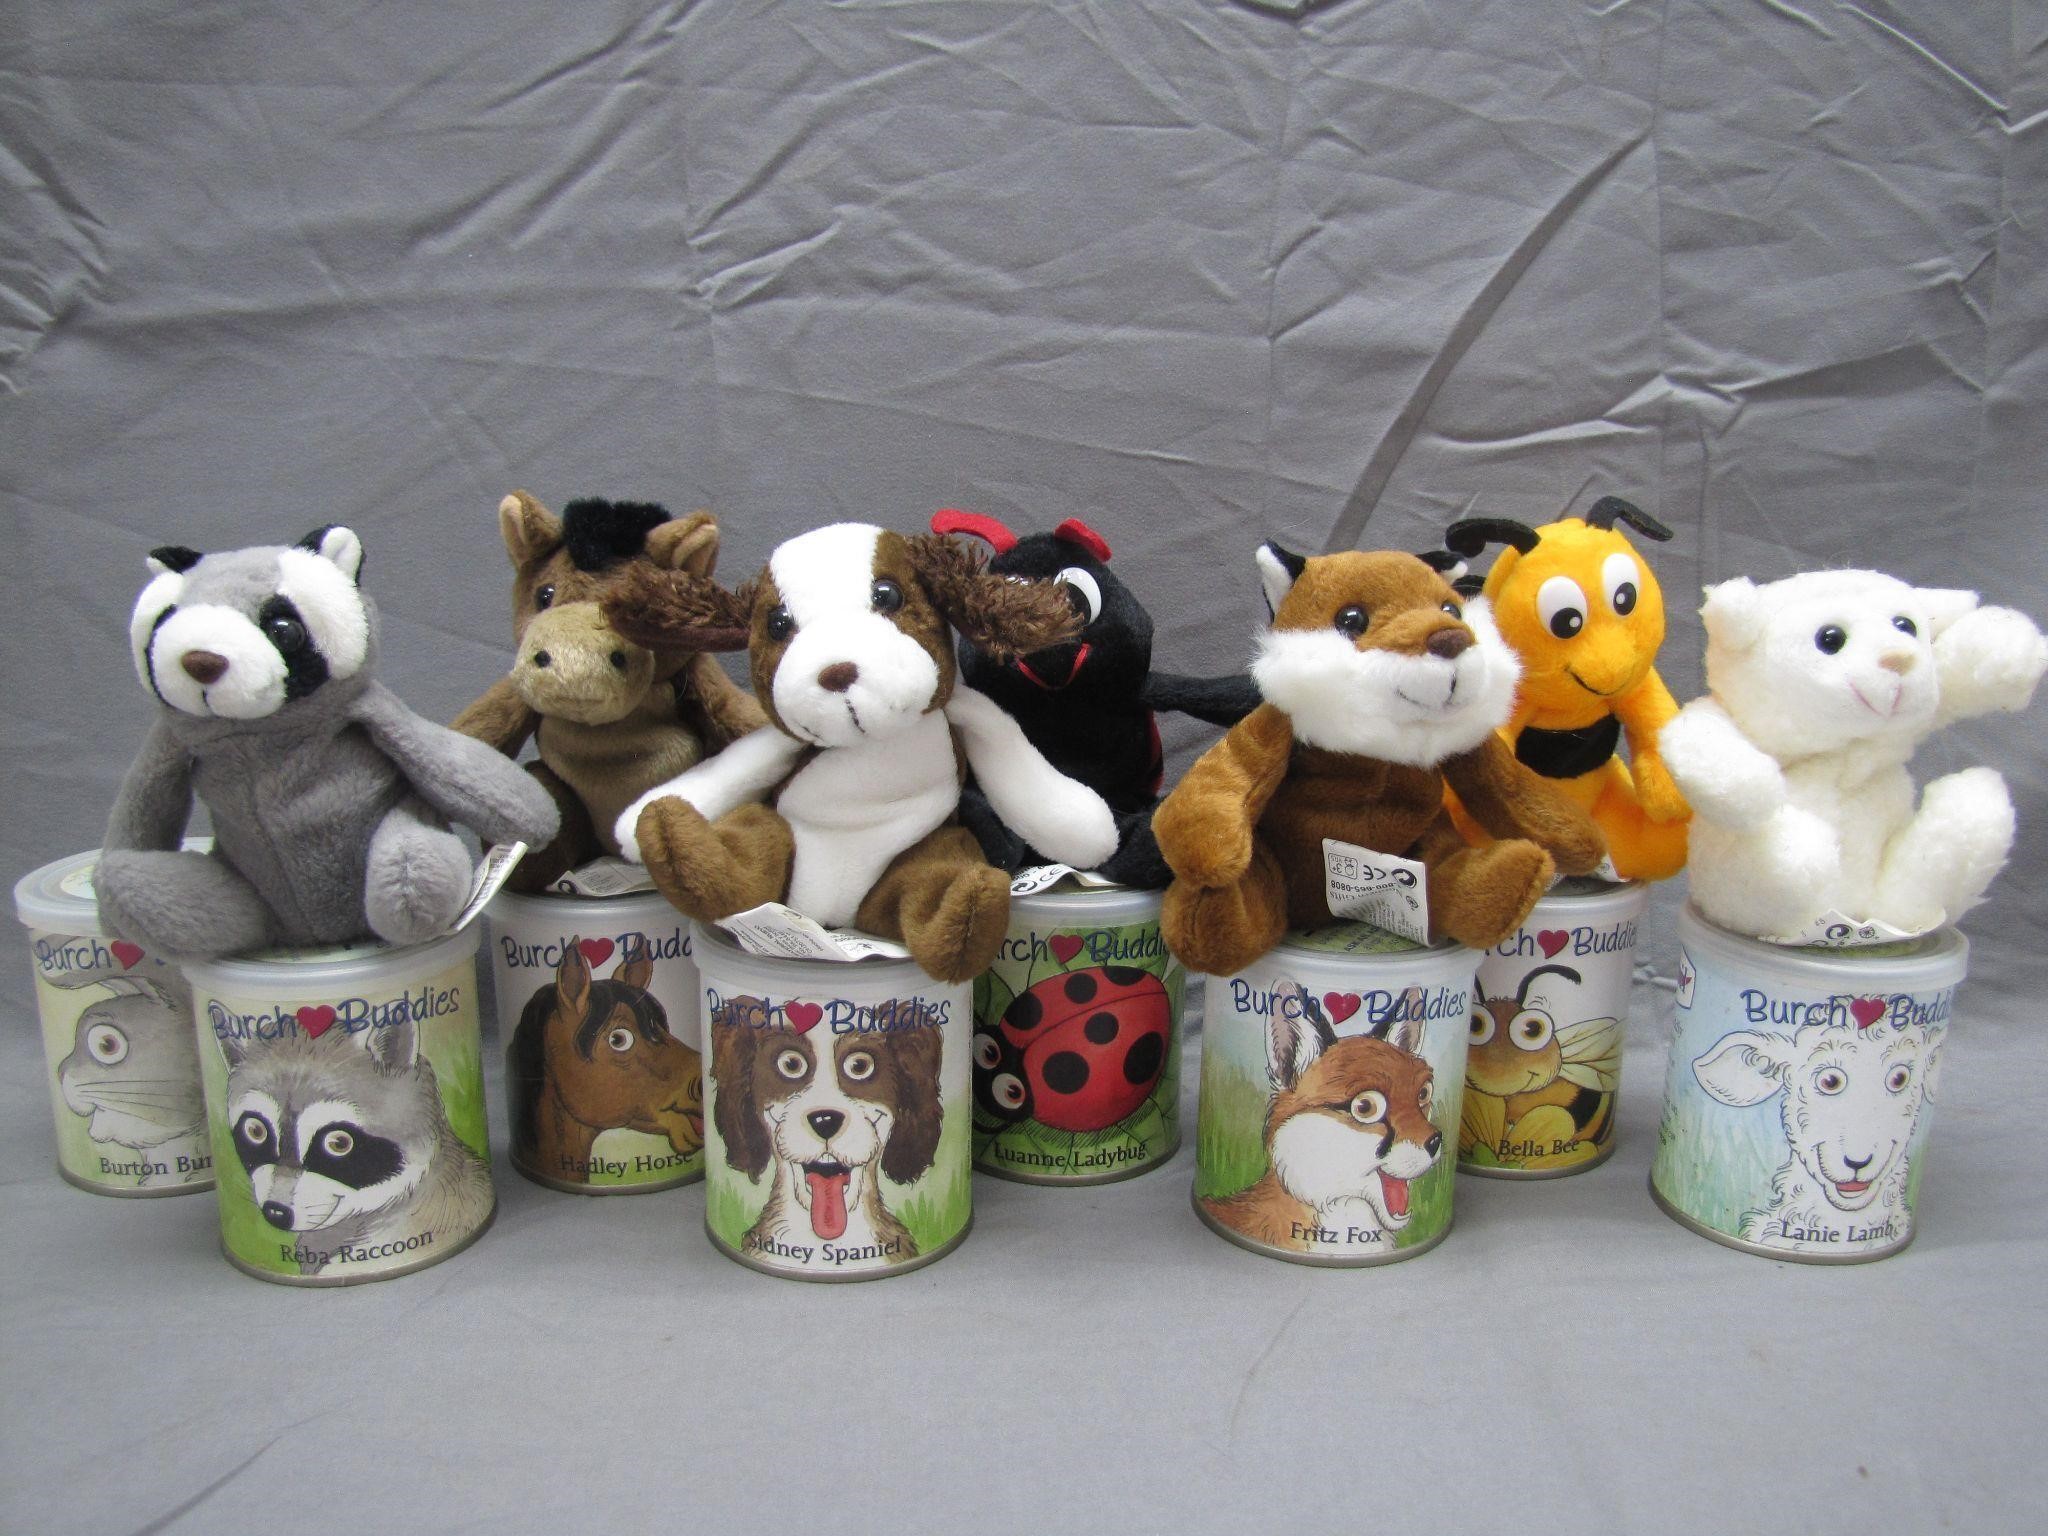 Burch Buddies Vintage Collectible Stuffed Toys